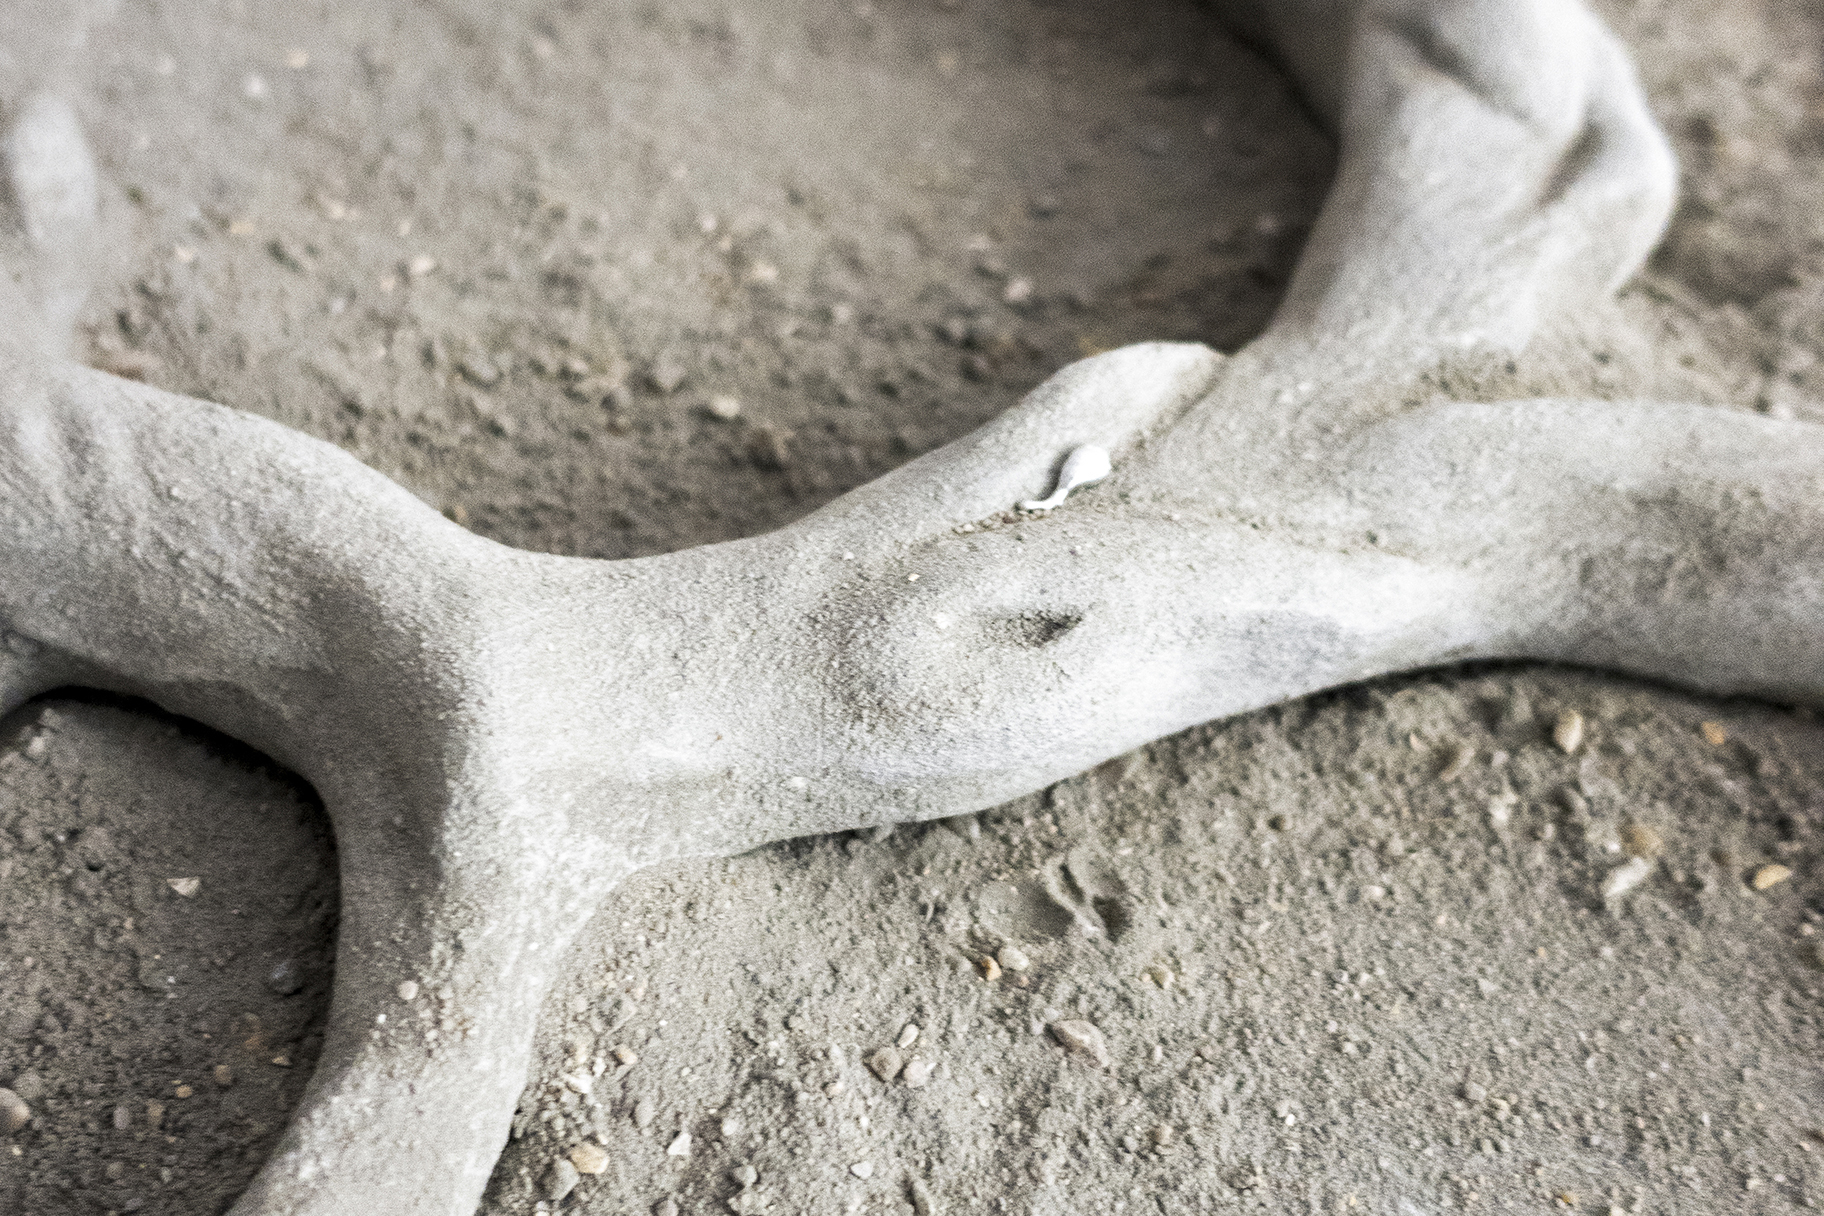 Central Root, 2021, detail, concrete, steel, 80 x 97 x 5 cm, Xolo Cuintle (Romy Texier and Valentin Vie Binet)